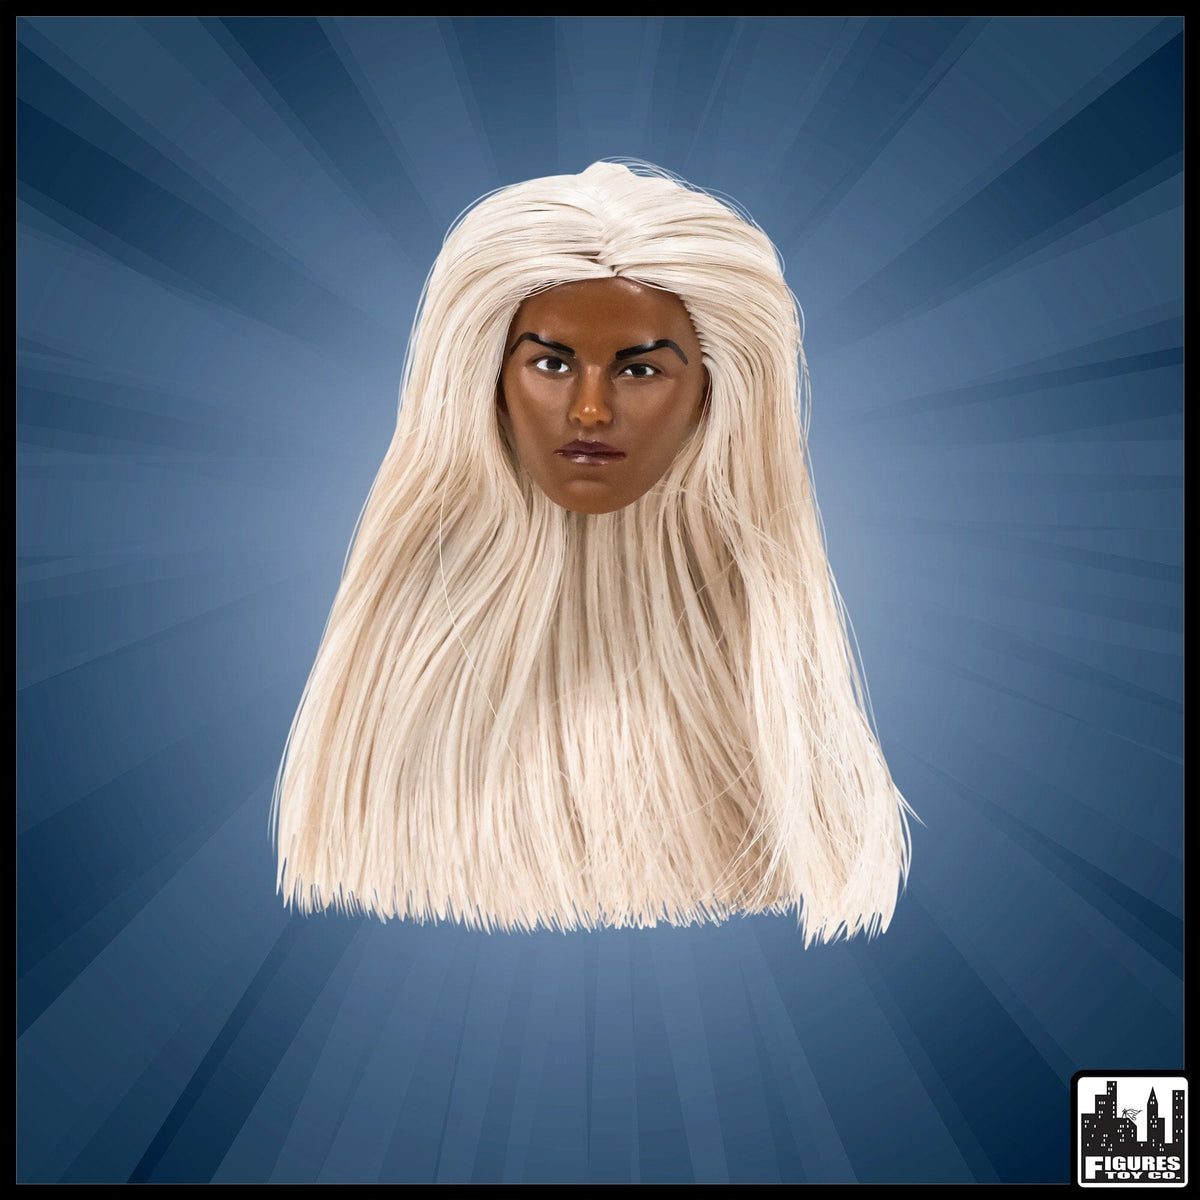 African American FEMALE Interchangeable Wrestling Action Figure Head With Long Blonde Hair